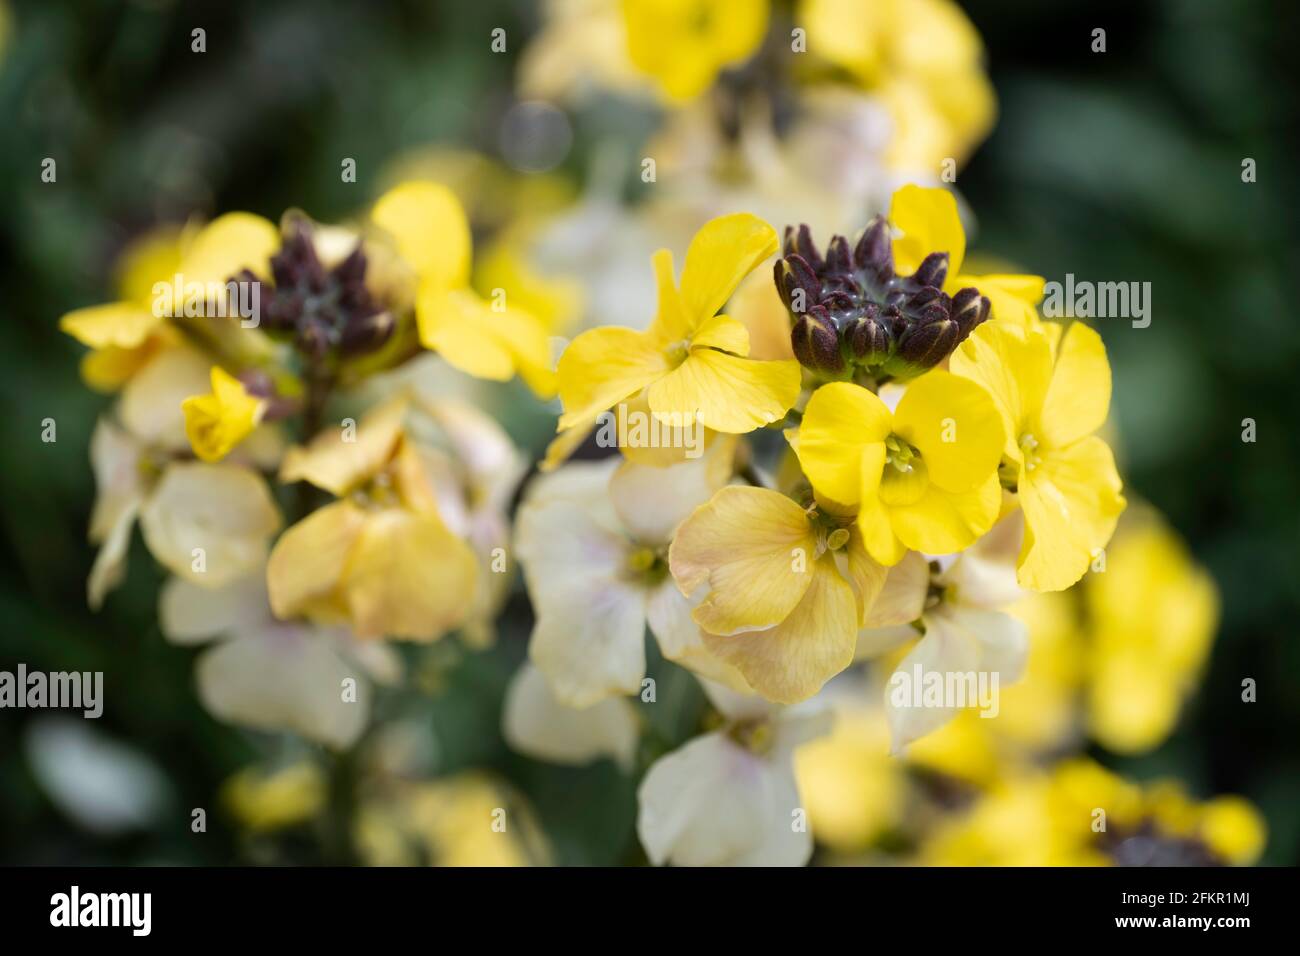 Close up of yellow flowers of the Erysimum linifolium 'Yellow Bird' in bloom. Also known as the wallflower. Narrow depth of field Stock Photo